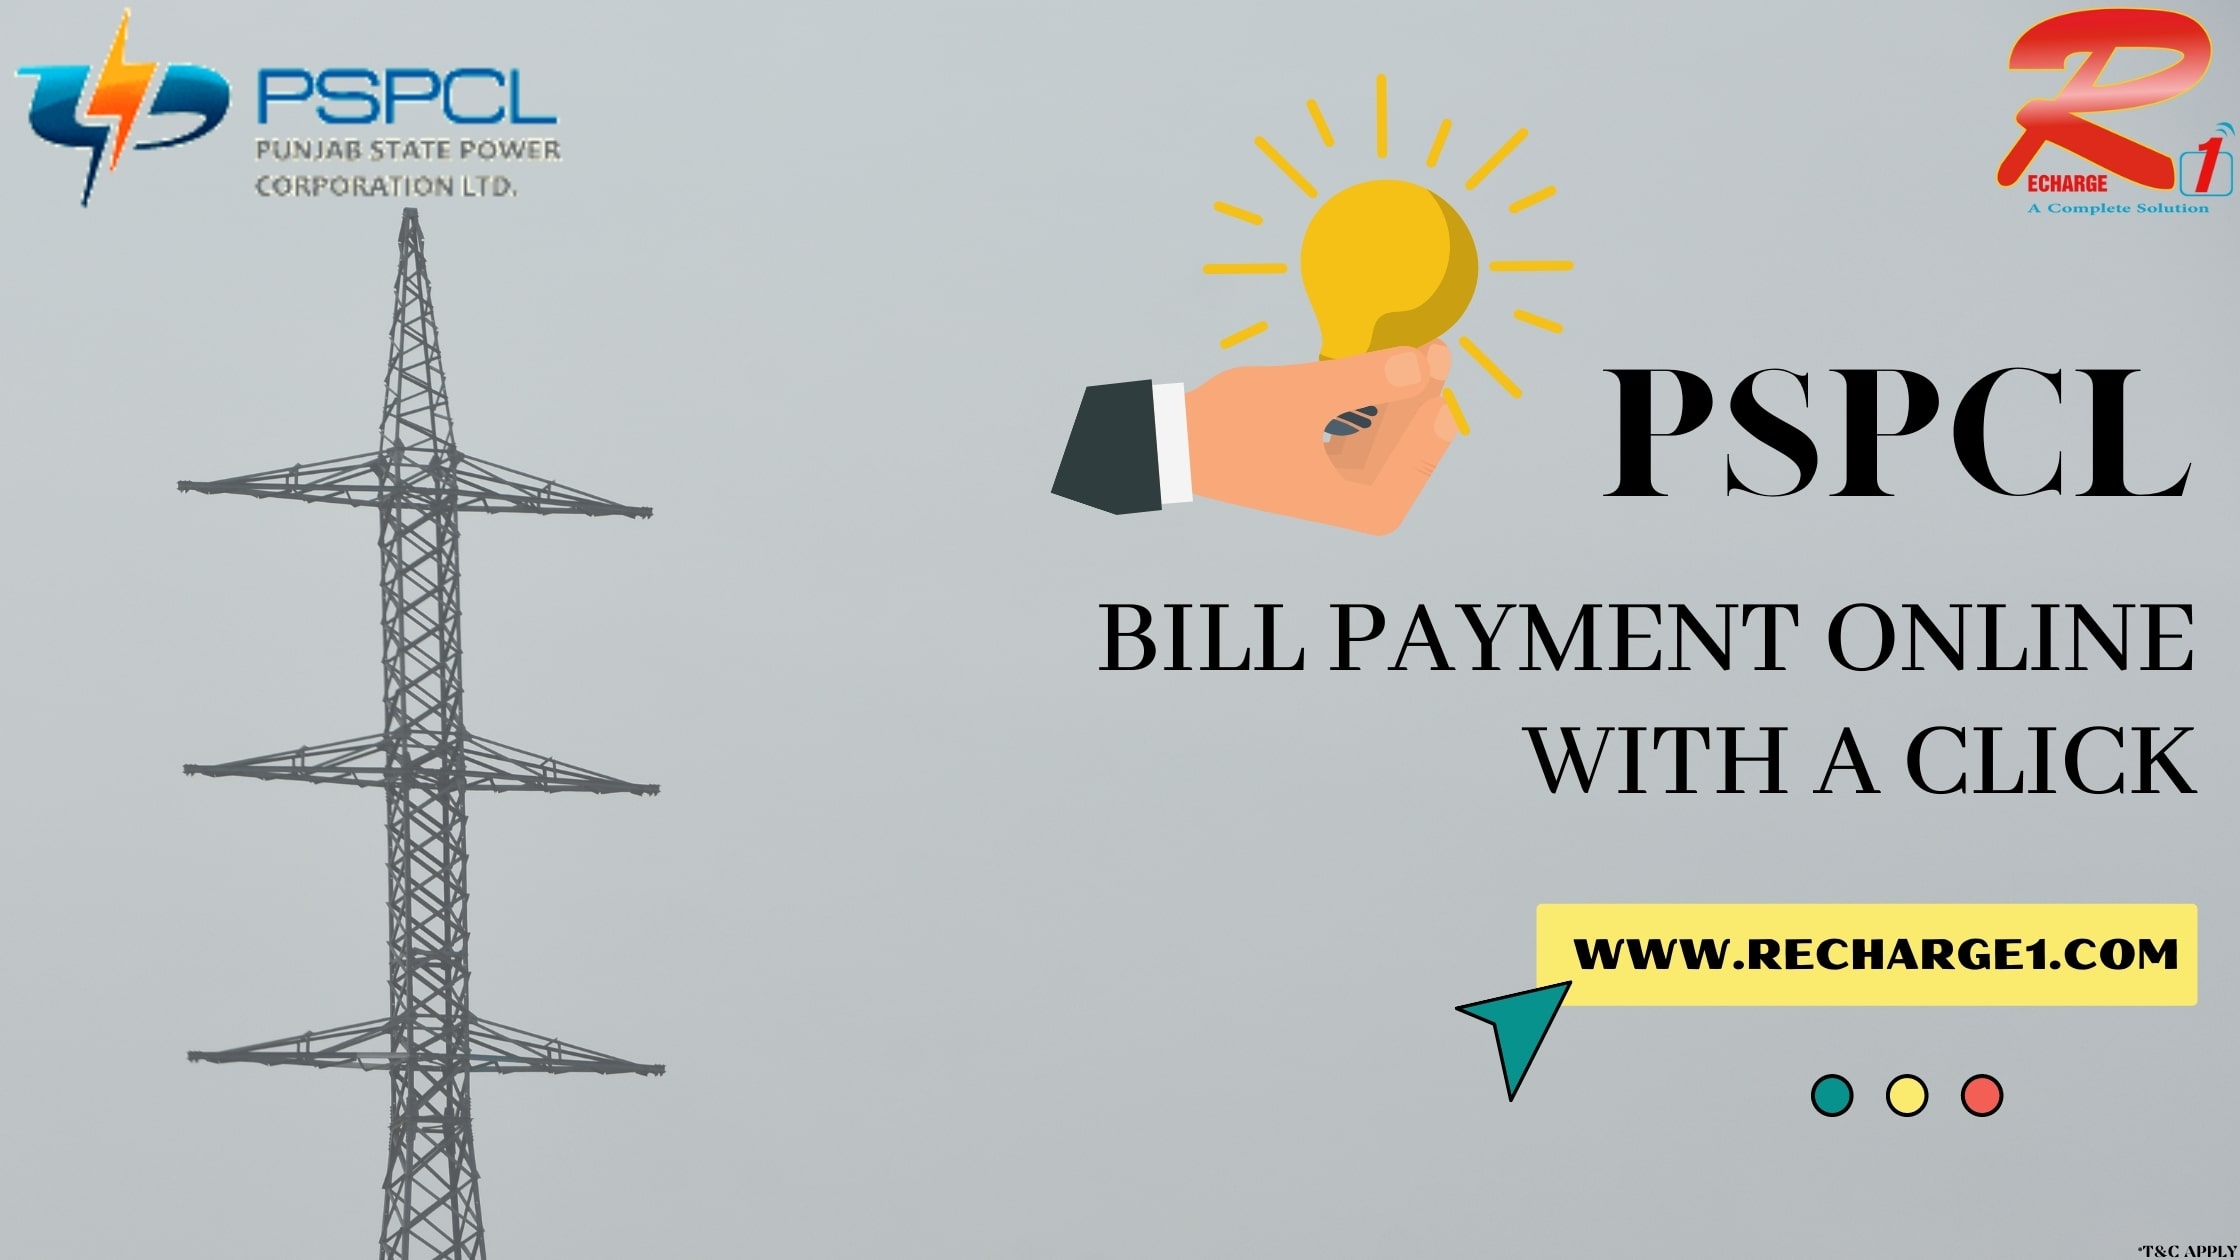  Make Your PSPCL Electricity Bill Payment Instantly With A Click